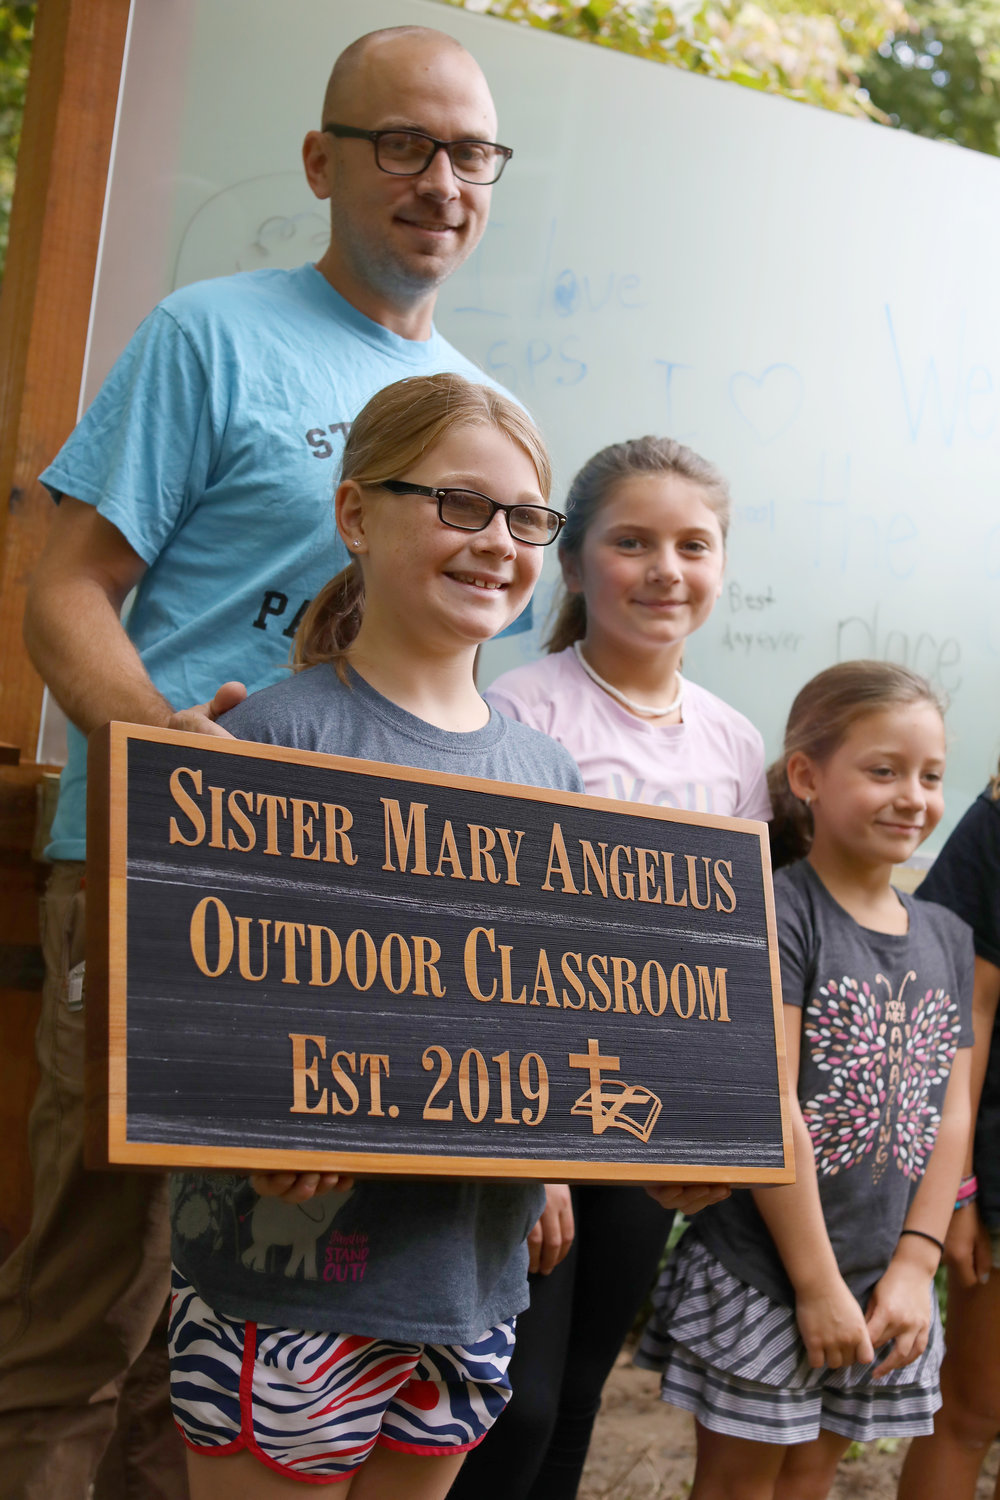 The new Outdoor Classroom at St. Peter School was dedicated to Sister Mary Angelus this past year. Students and parents gather for a photo during the summer of 2019.